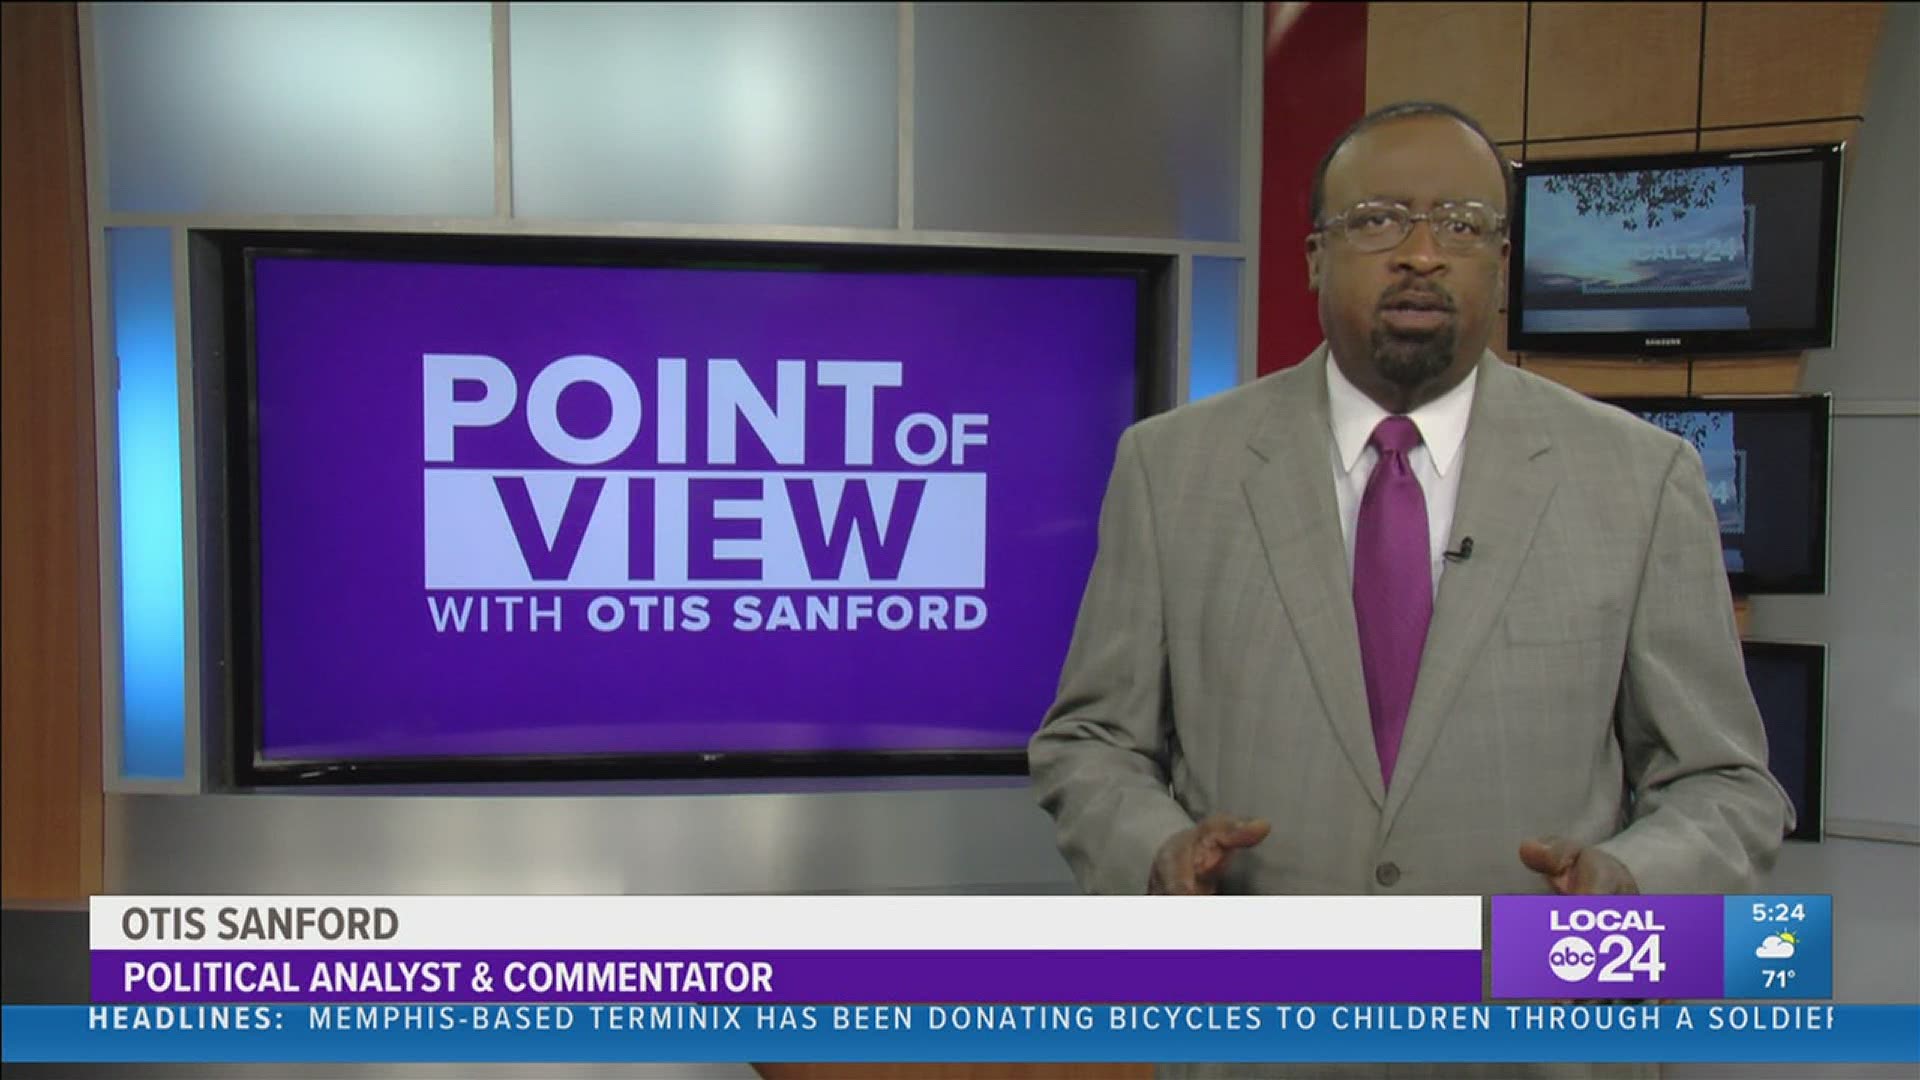 Local 24 News political analyst and commentator Otis Sanford shares his point of view on Mississippi Secretary of State Michael Watson’s comments about voters.